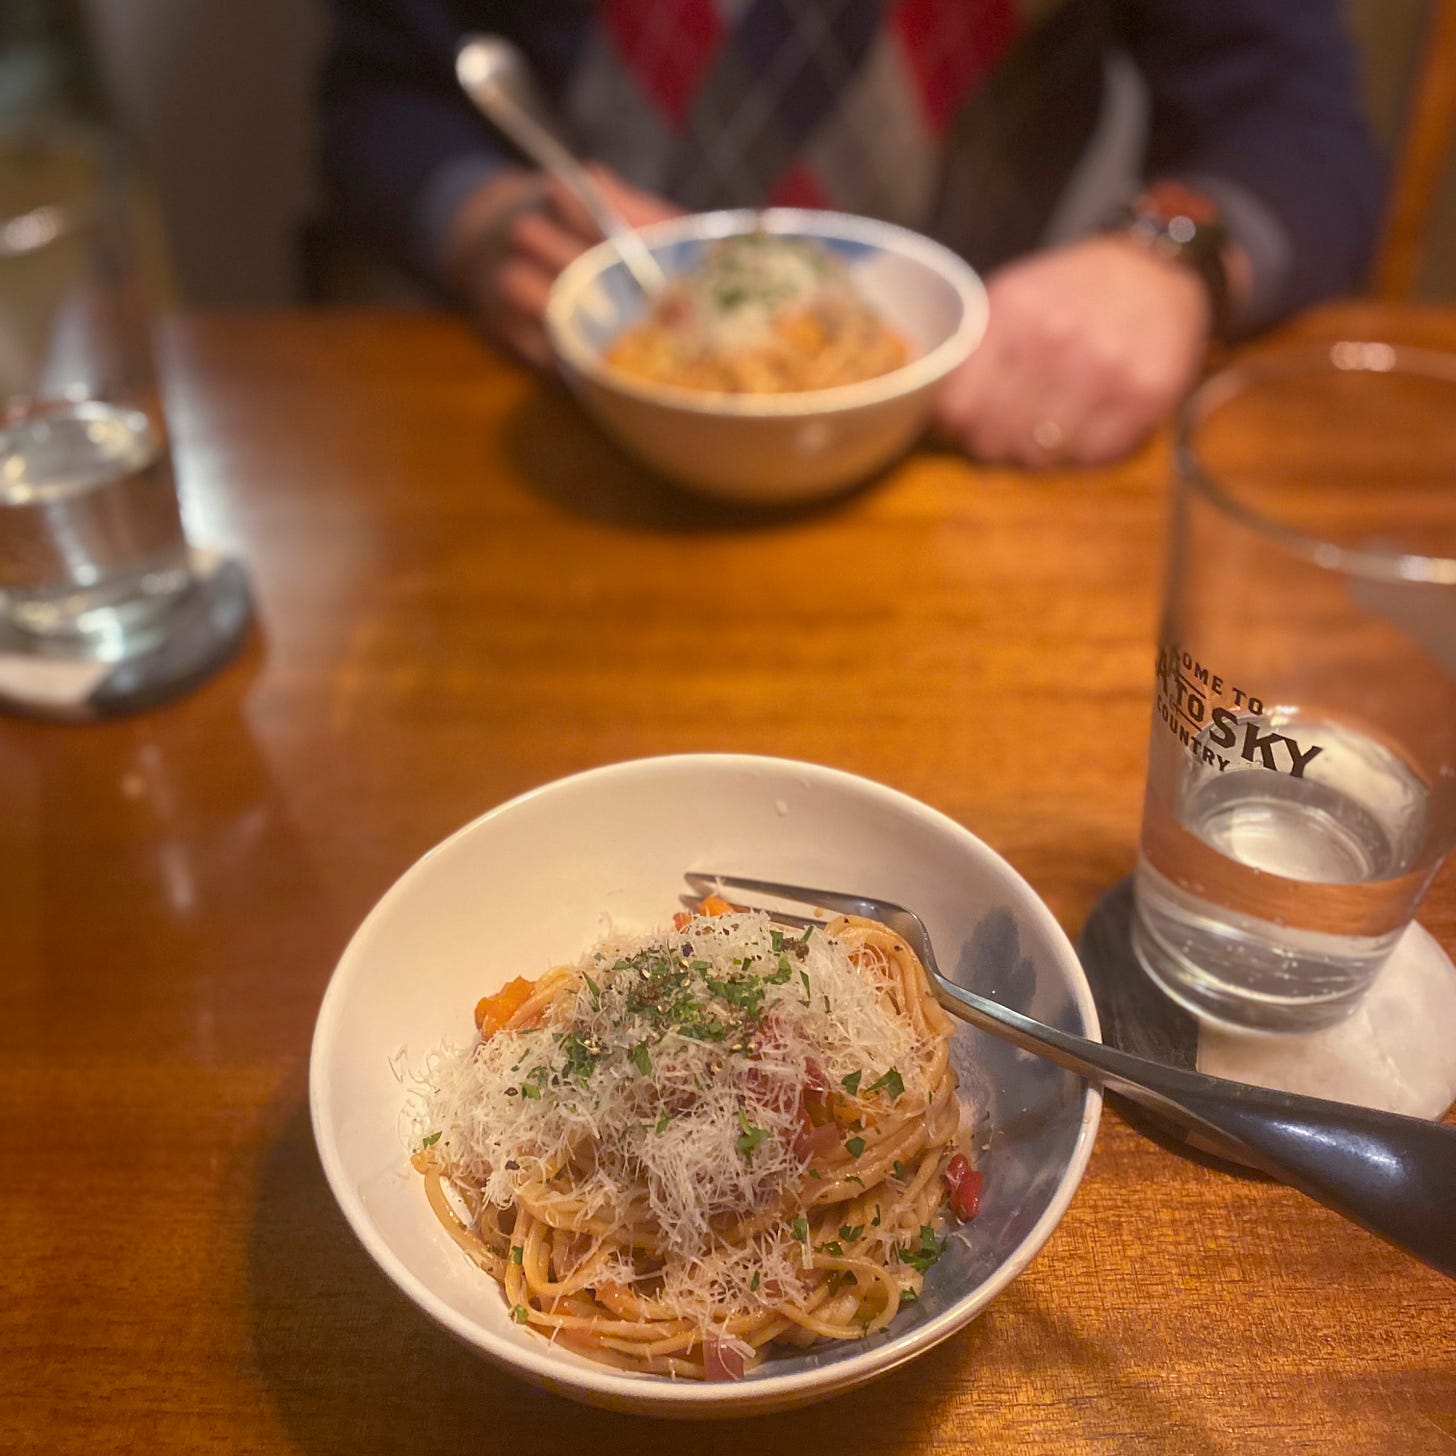 A white bowl of linguine in the sauce described above, with a hefty pile of shredded pecorino on top, as well as ground pepper and chopped parsley. Jeff is in the background with a bowl of the same, and two glasses of water sit on coasters next to the bowls.